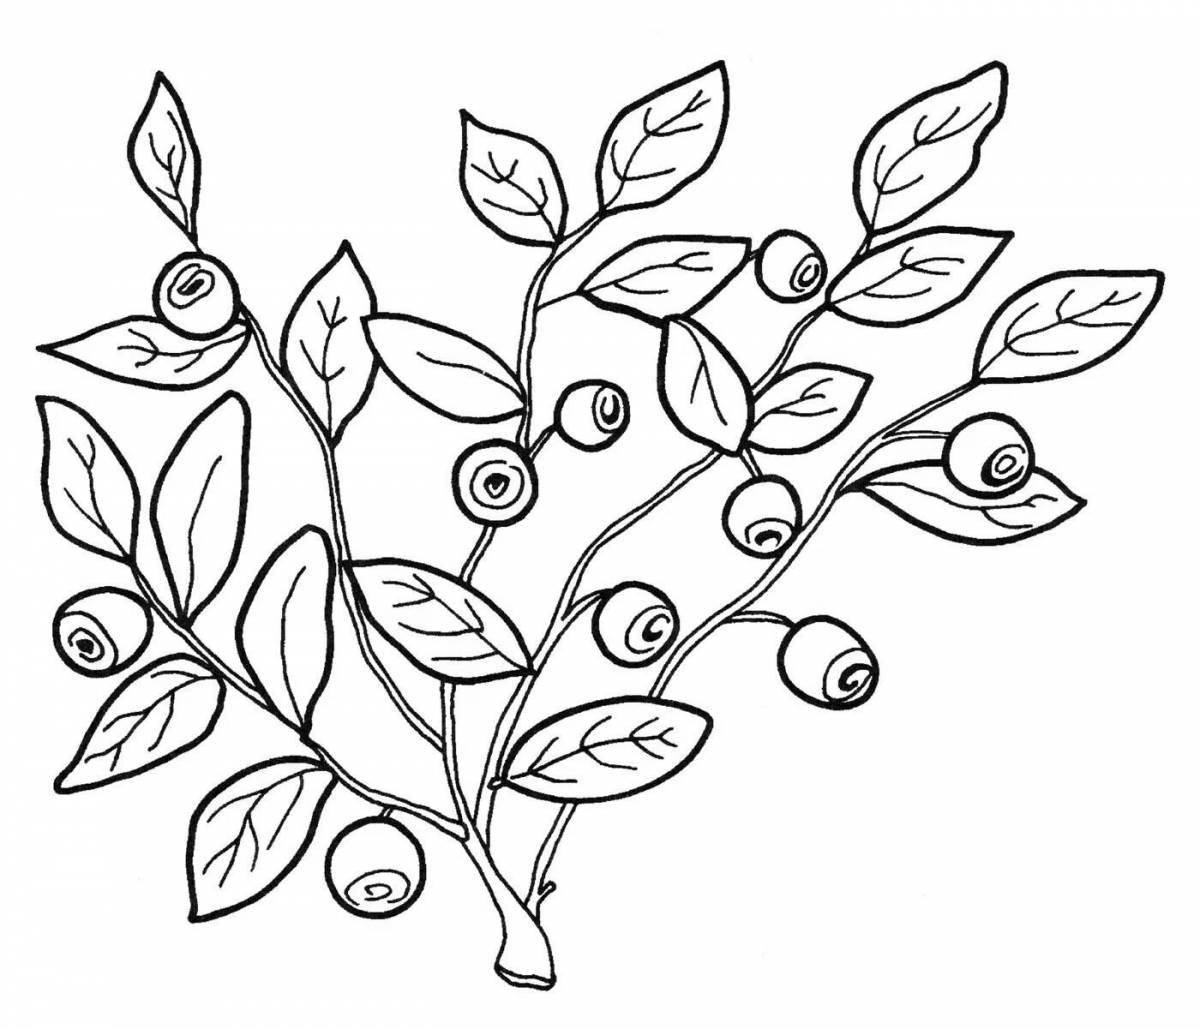 Live lingonberry coloring